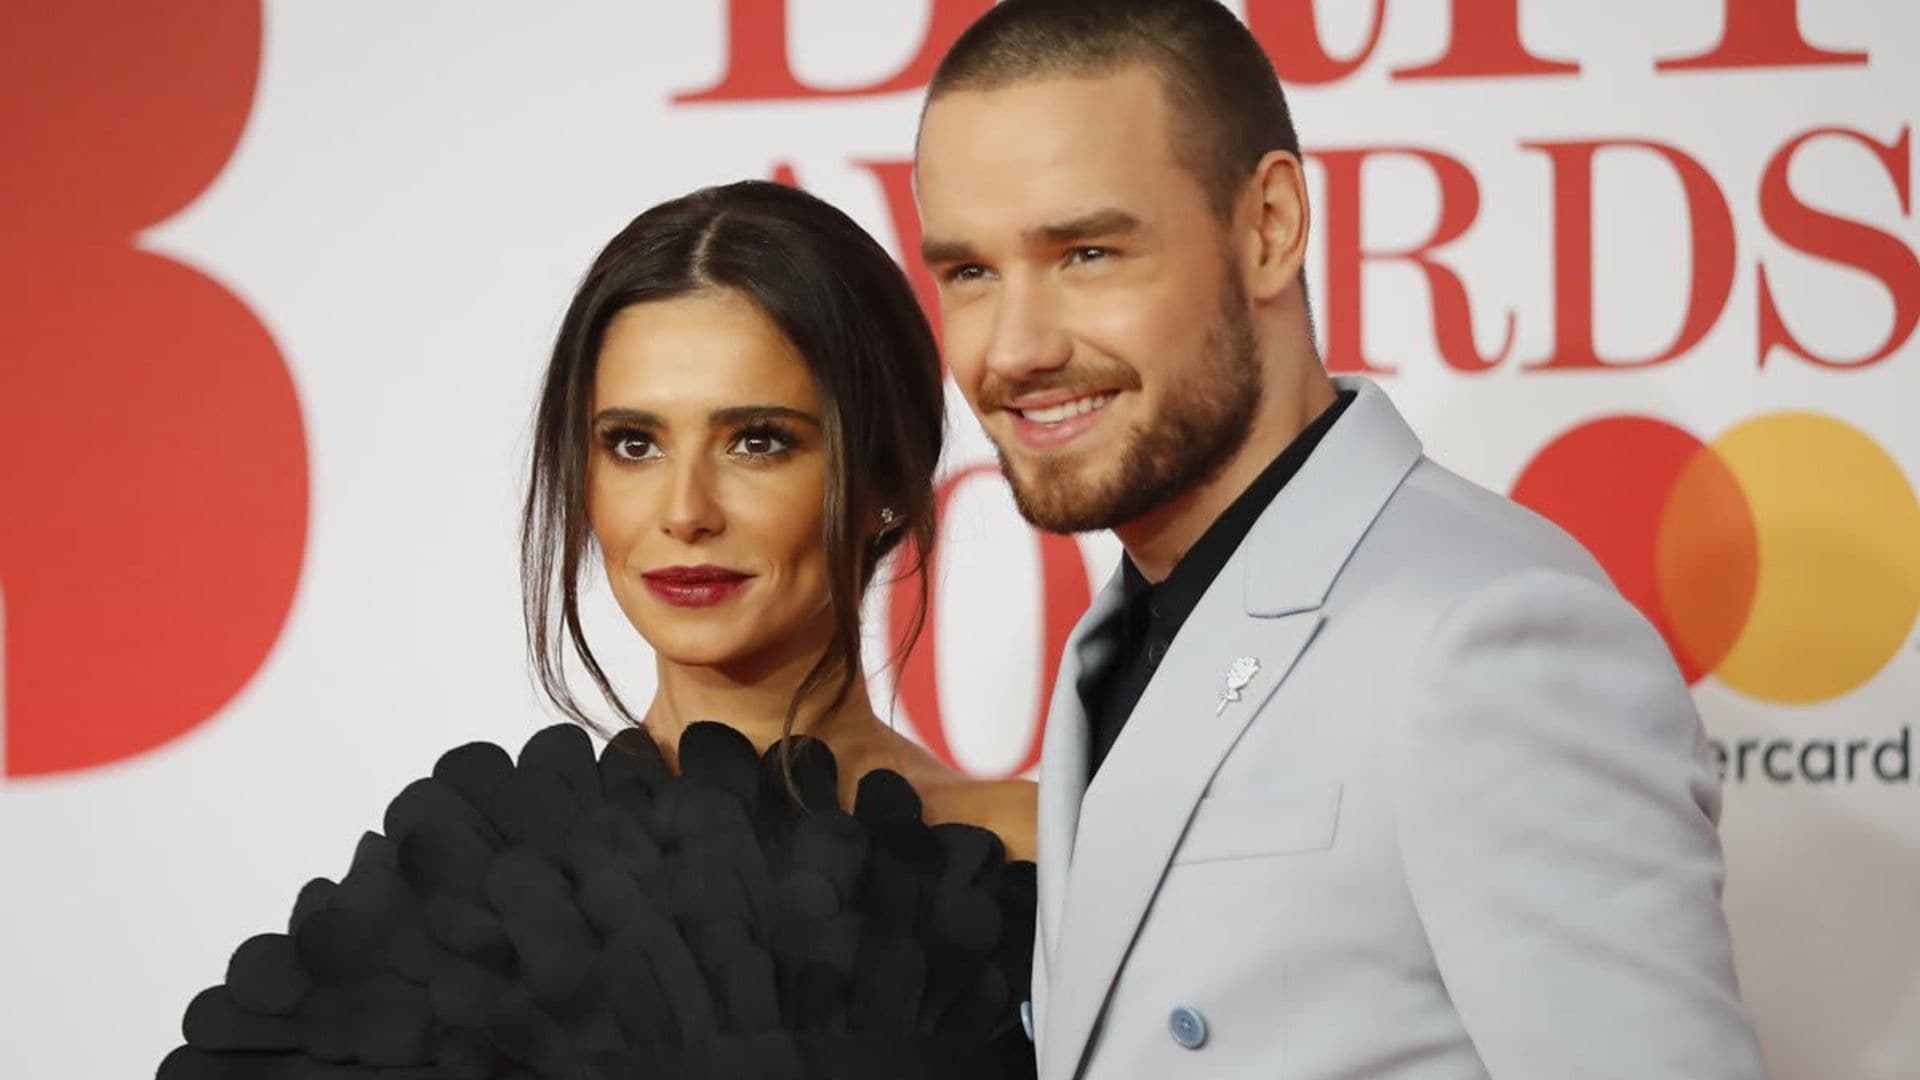 Liam Payne shares parenting experience with ex-girlfriend Cheryl Cole